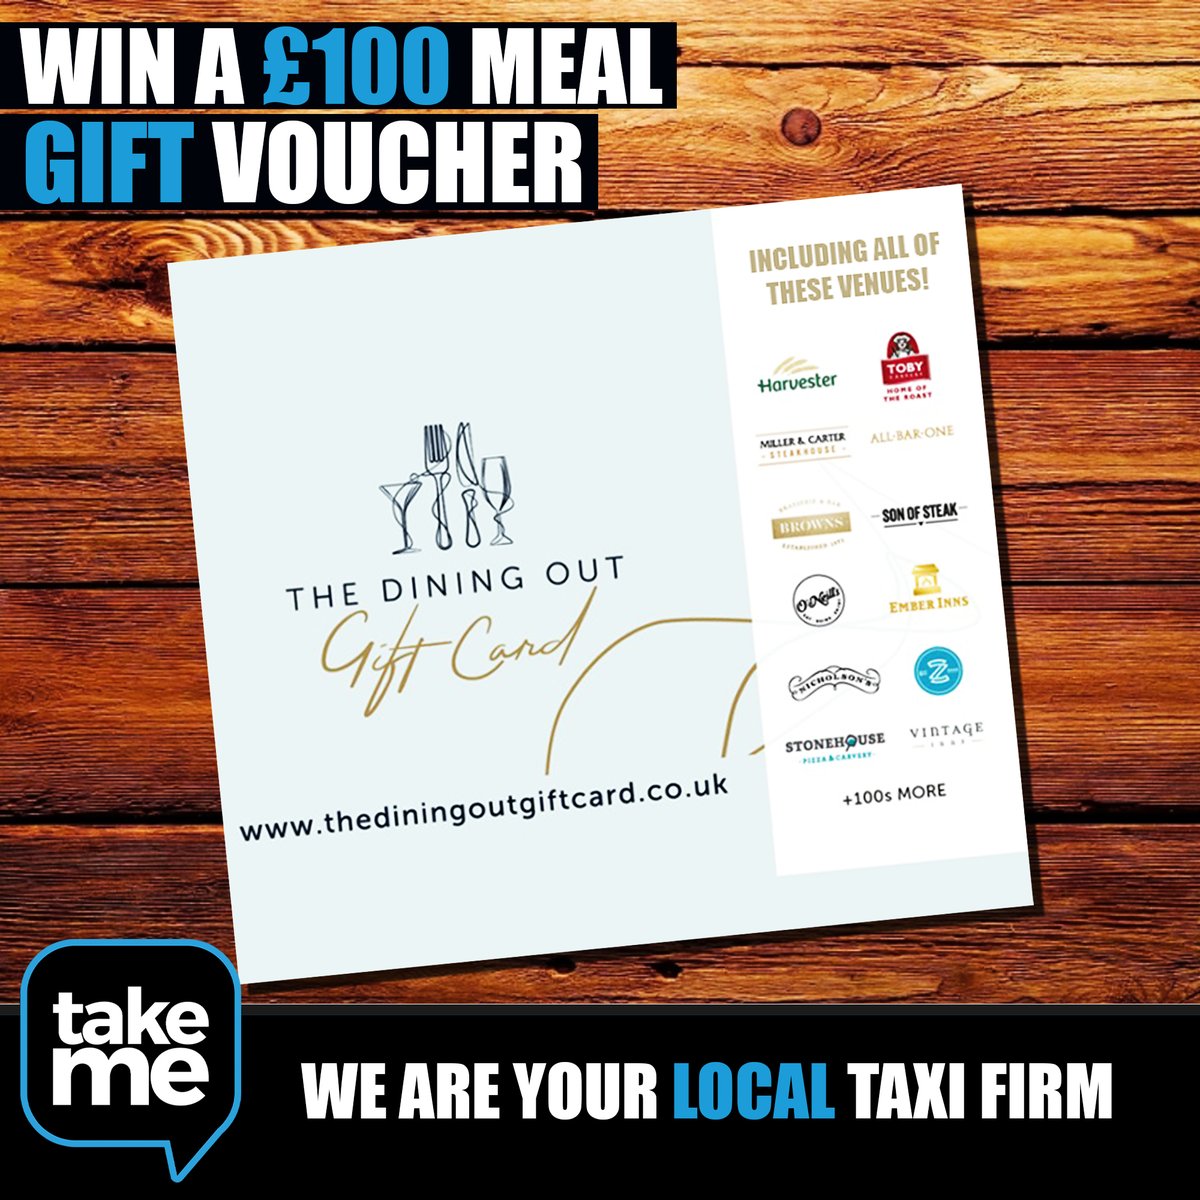 Win a £100 MEAL voucher thanks to our partners TAKE ME
To enter
1]LIKE This post
2]SHARE or Retweet 
3]TAG the 3 people you would take
4]FOLLOW Take Me Birmingham 
Winner announced on LAST DAY OF THE MONTH
#Raffle #Prize #TakeMeBirmingham